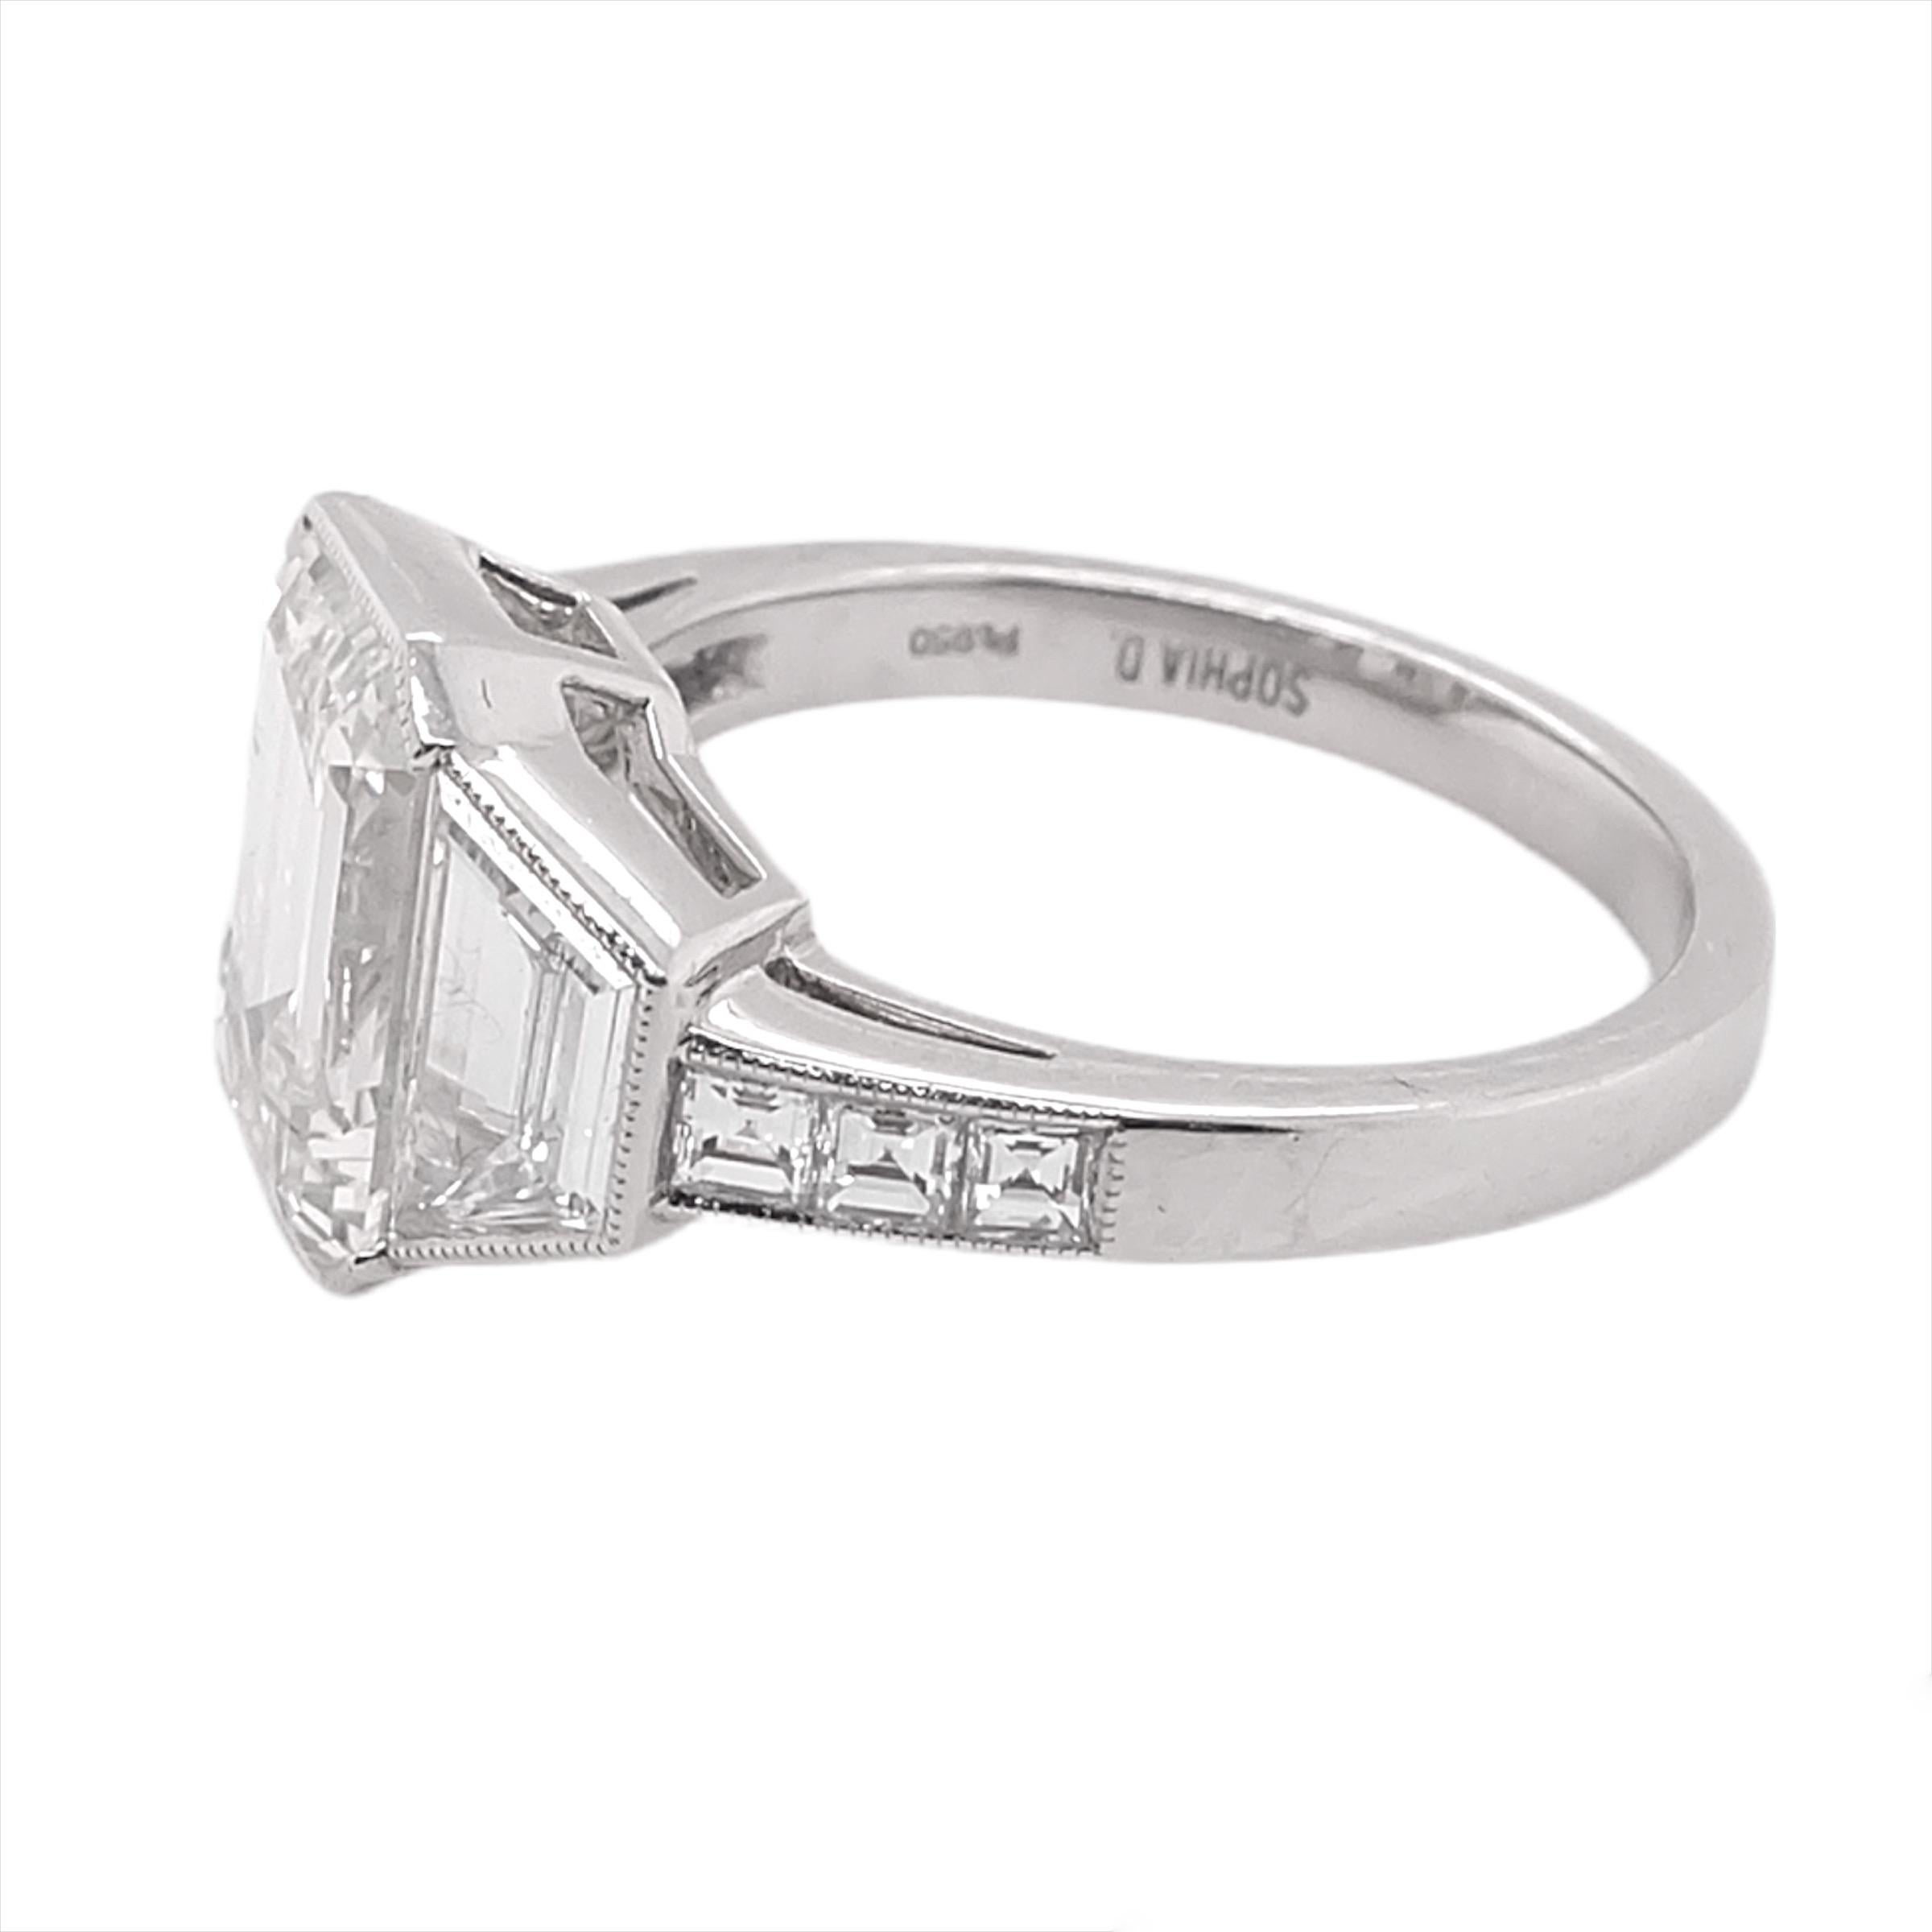 Flawless EGL certified emerald cut diamond ring features a 3.62 carat center stone set that has a color and clarity of K-VVS2 with 0.88 carat of baguette diamonds and 0.30 small diamonds.

Sophia D by Joseph Dardashti LTD has been known worldwide